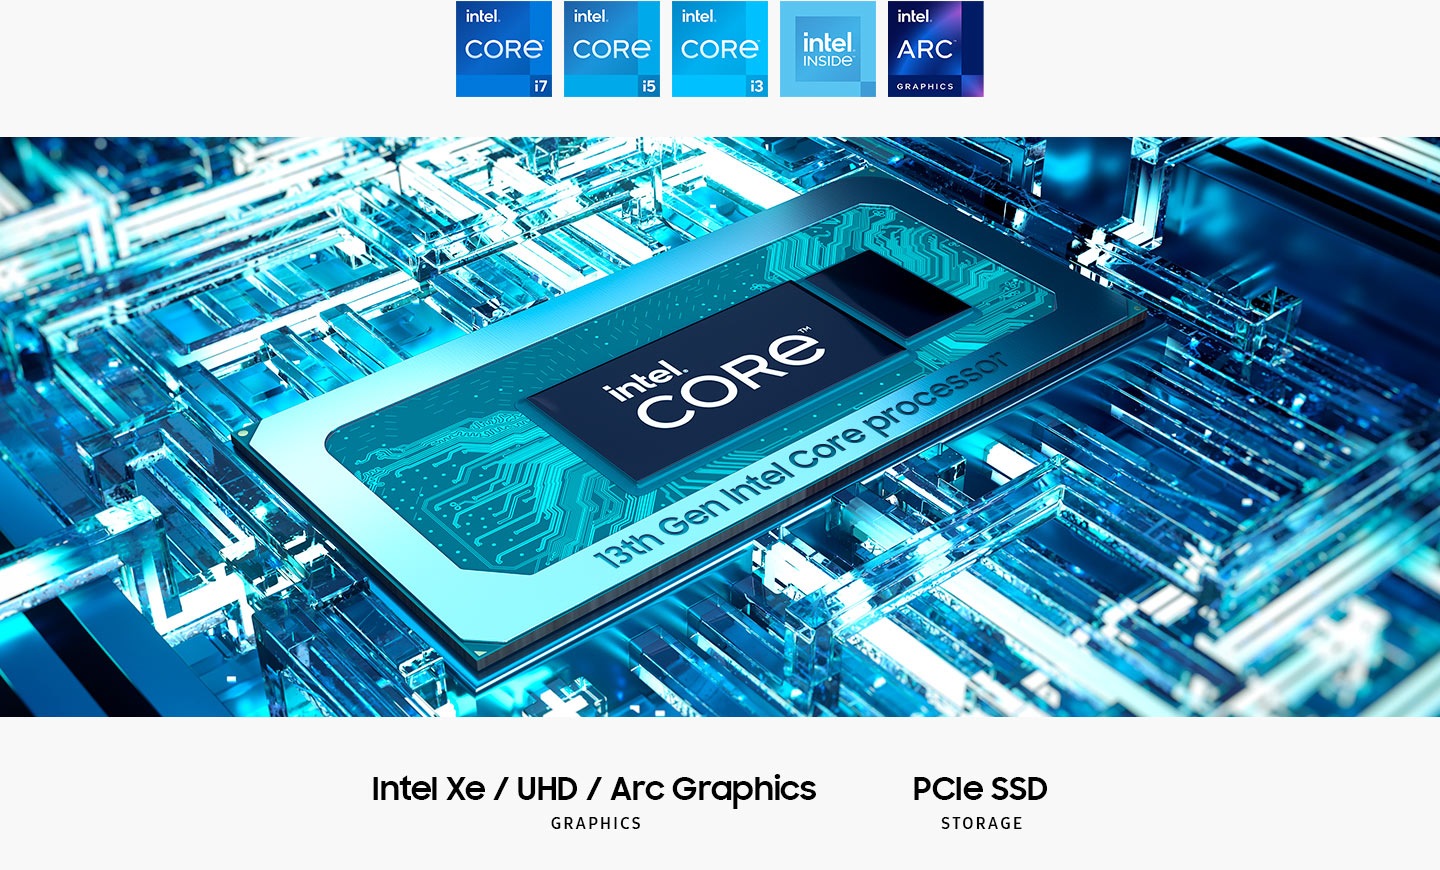 13th Gen Intel® Core™ processor is on the mainboard with the text intel® Core™ in the middle. Intel Xe / UHD / Arc Graphics. PCIe SSD Storage. Intel Core i7, intel Core i5, intel Core i3, intel Inside and intel ARC Graphics logos are shown.